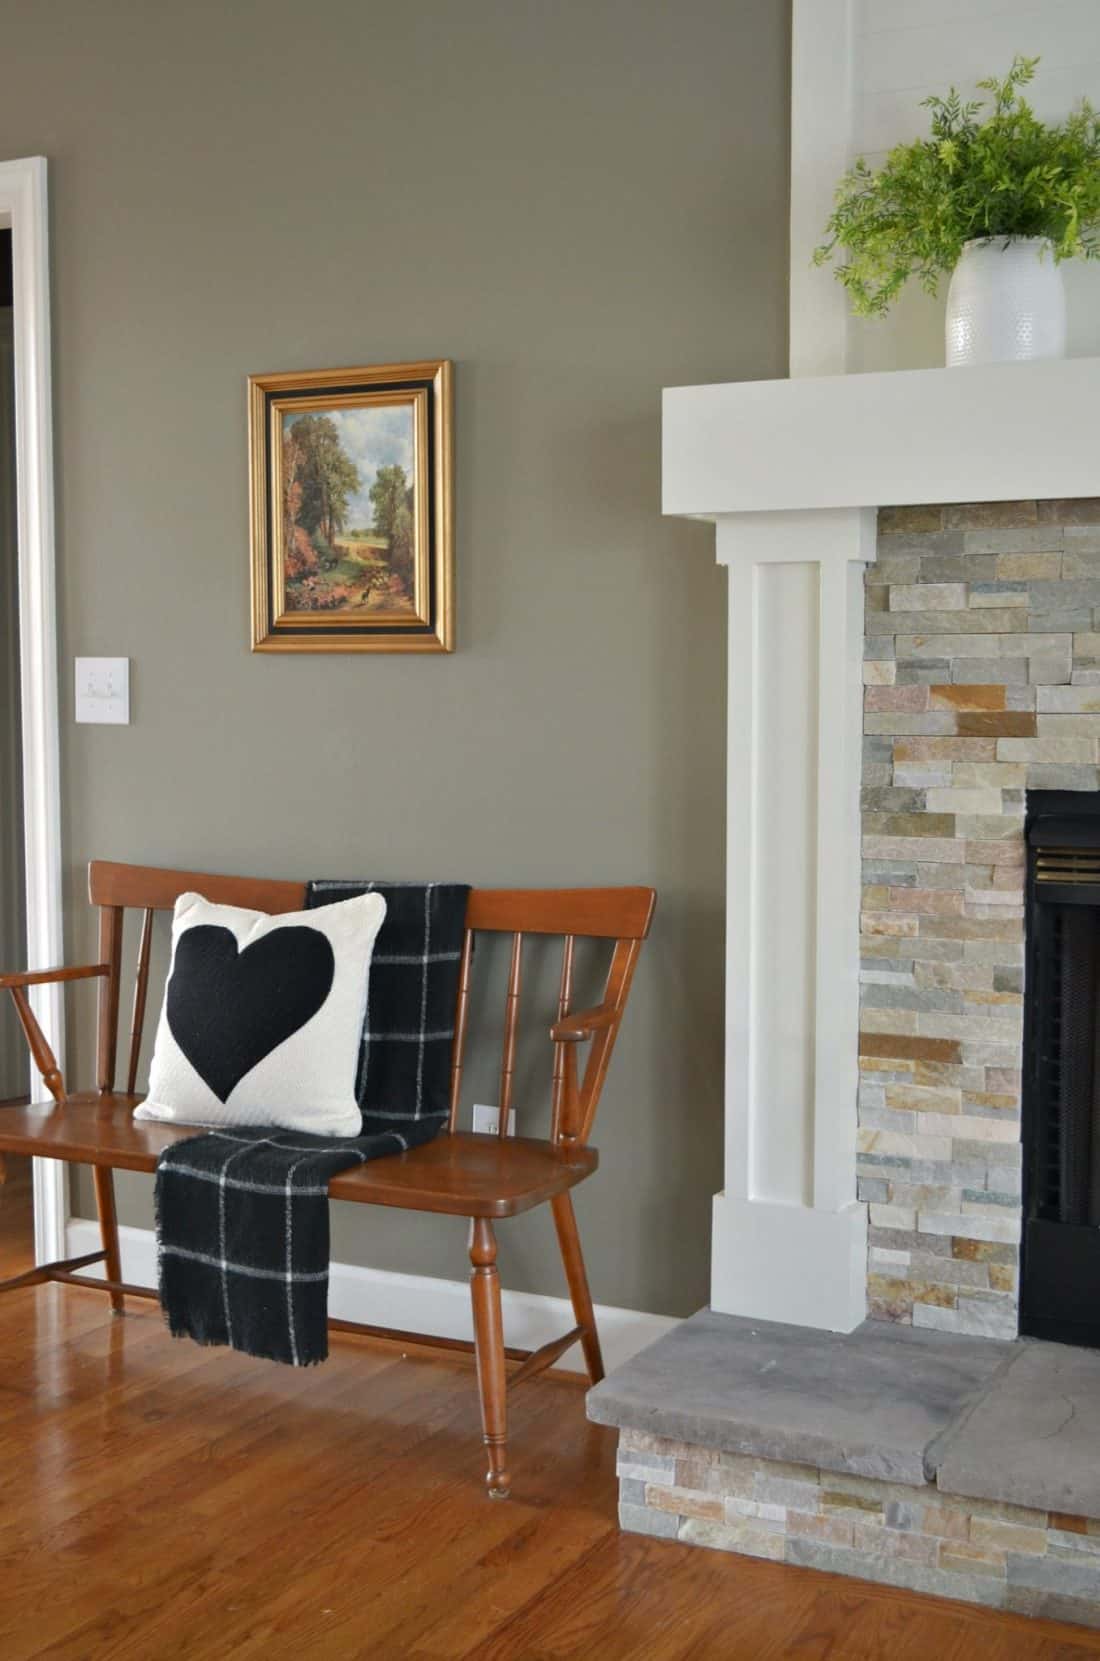 Wood bench by fireplace painted